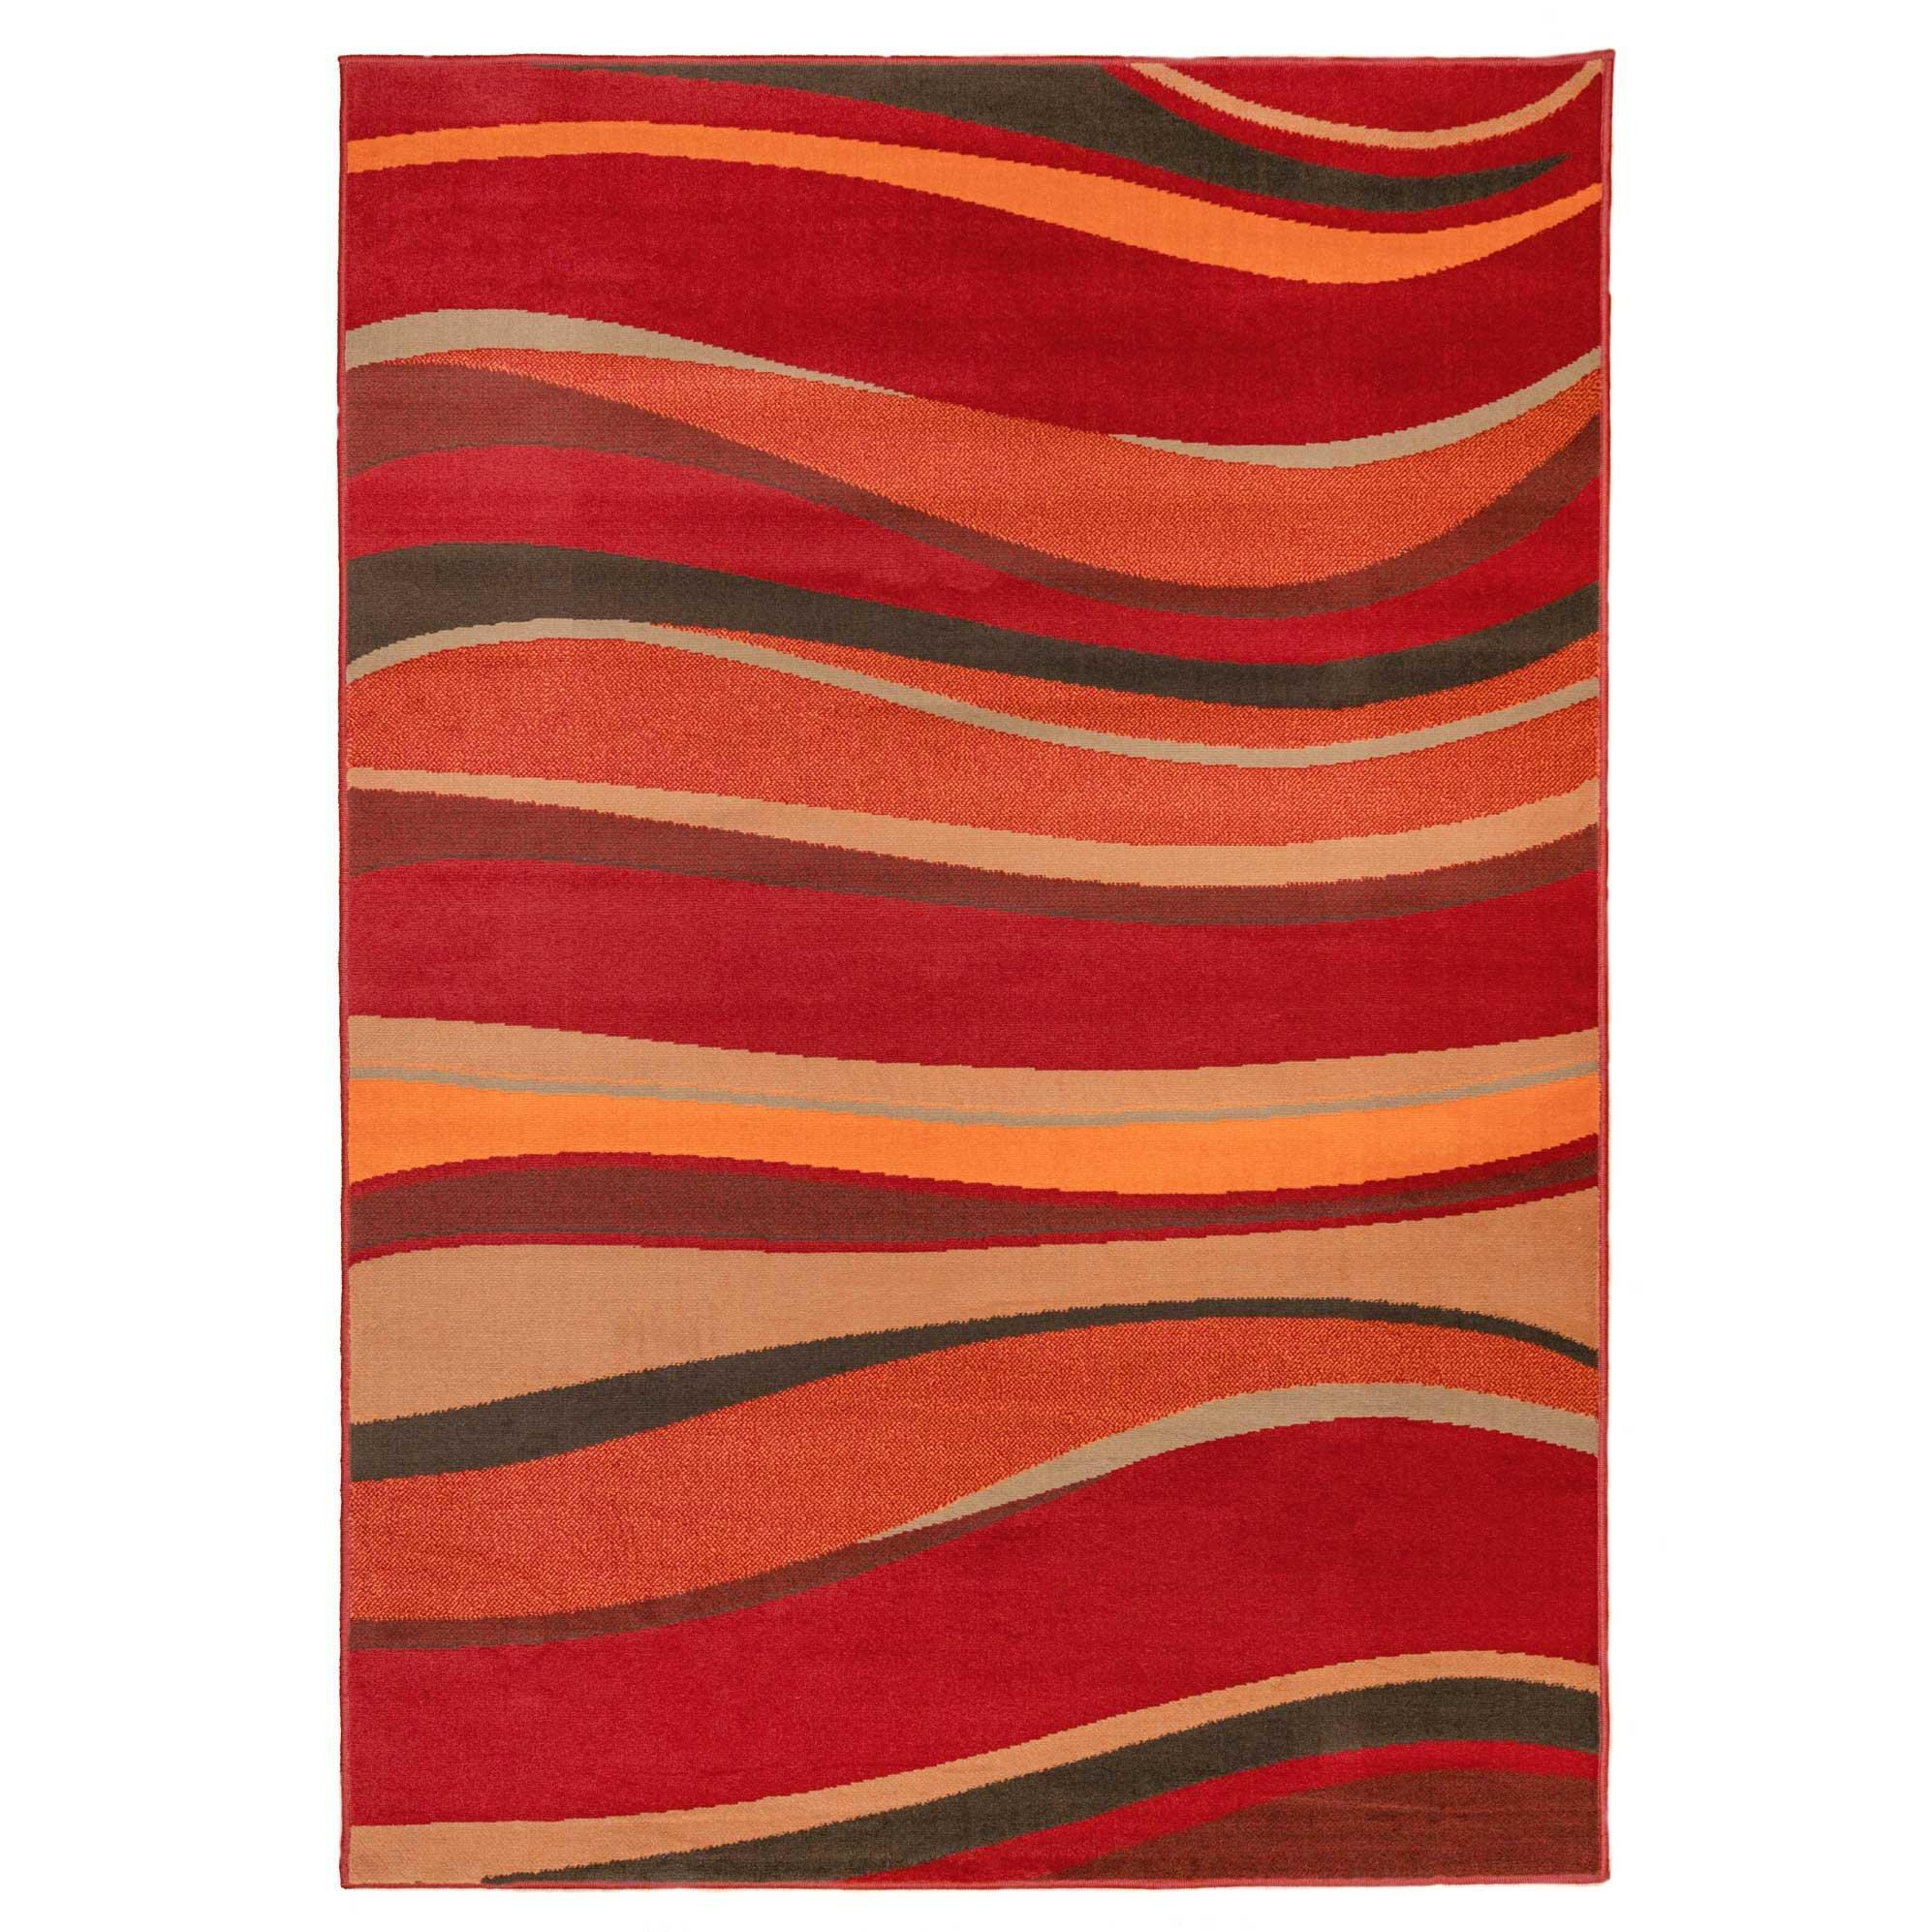 Warm Red Terracotta Retro Wave Living Area Rug - image 1